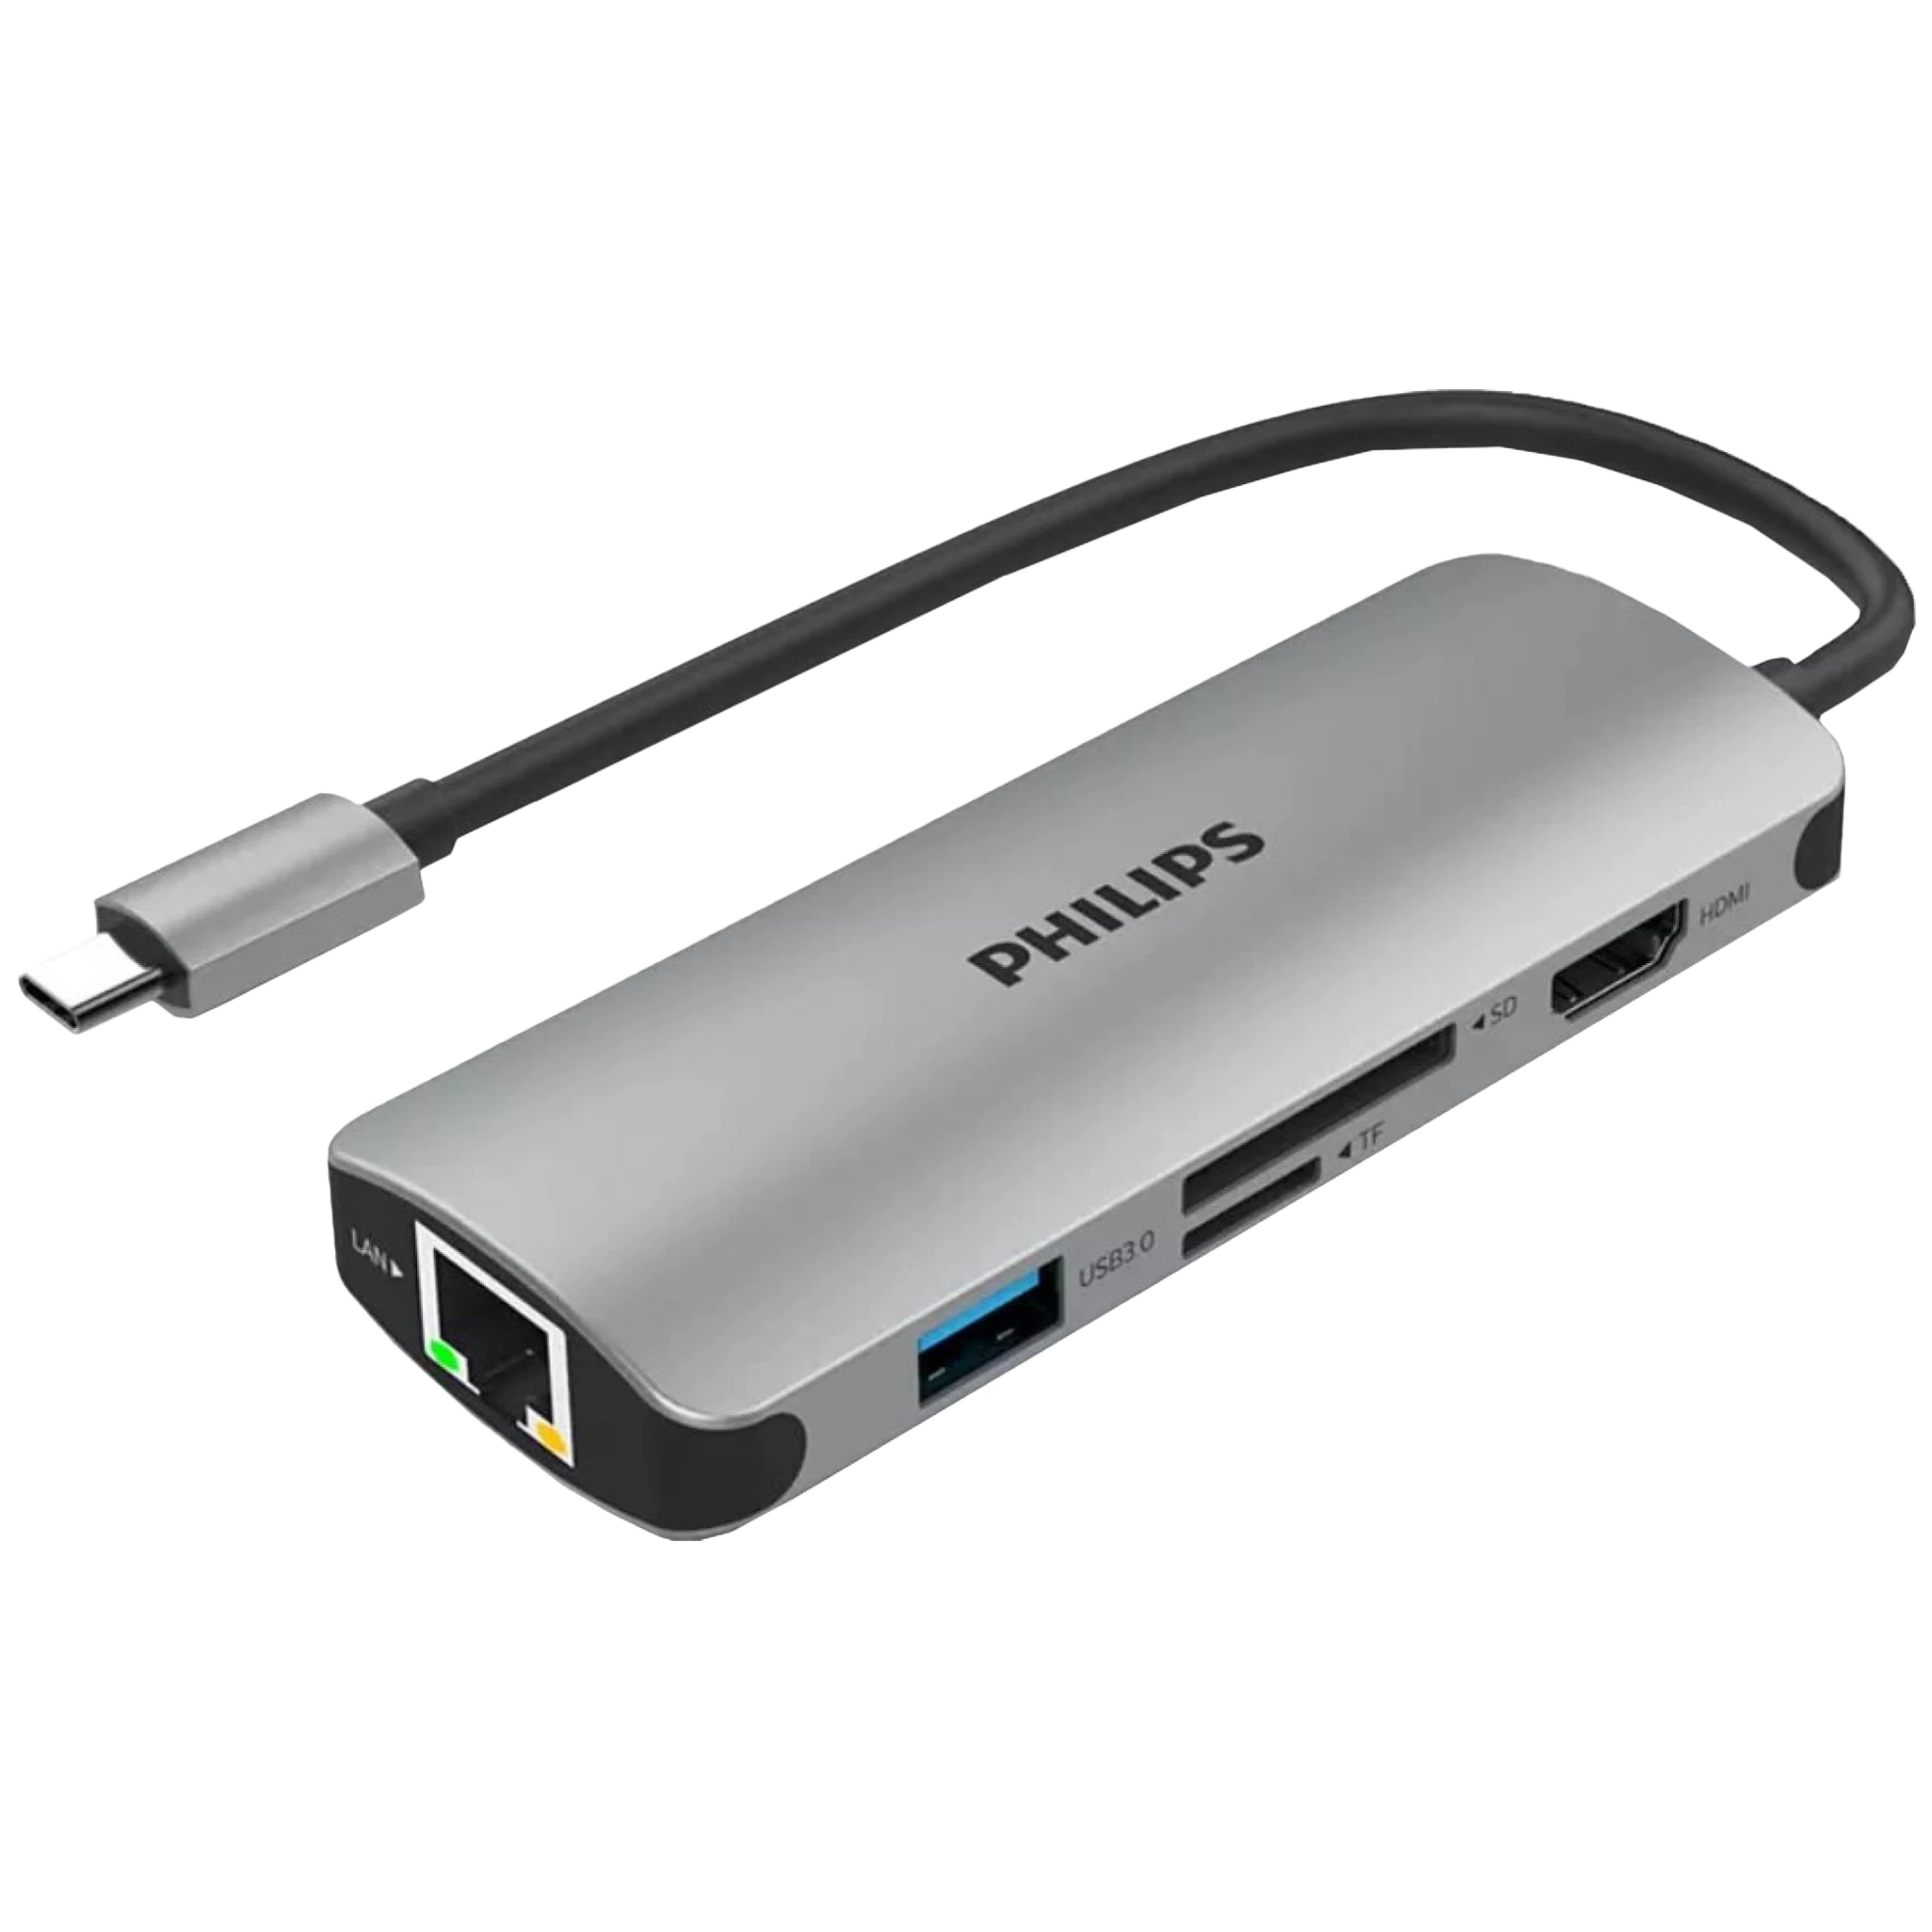 Philips 6-in-1 USB 3.0 Type C to RJ45, USB 3.0 Type C, USB 3.0 Type A, SD Card Slot, TF Card Reader, HDMI Type A USB Hub (5 Gbps Data Transfer Rate, Grey)